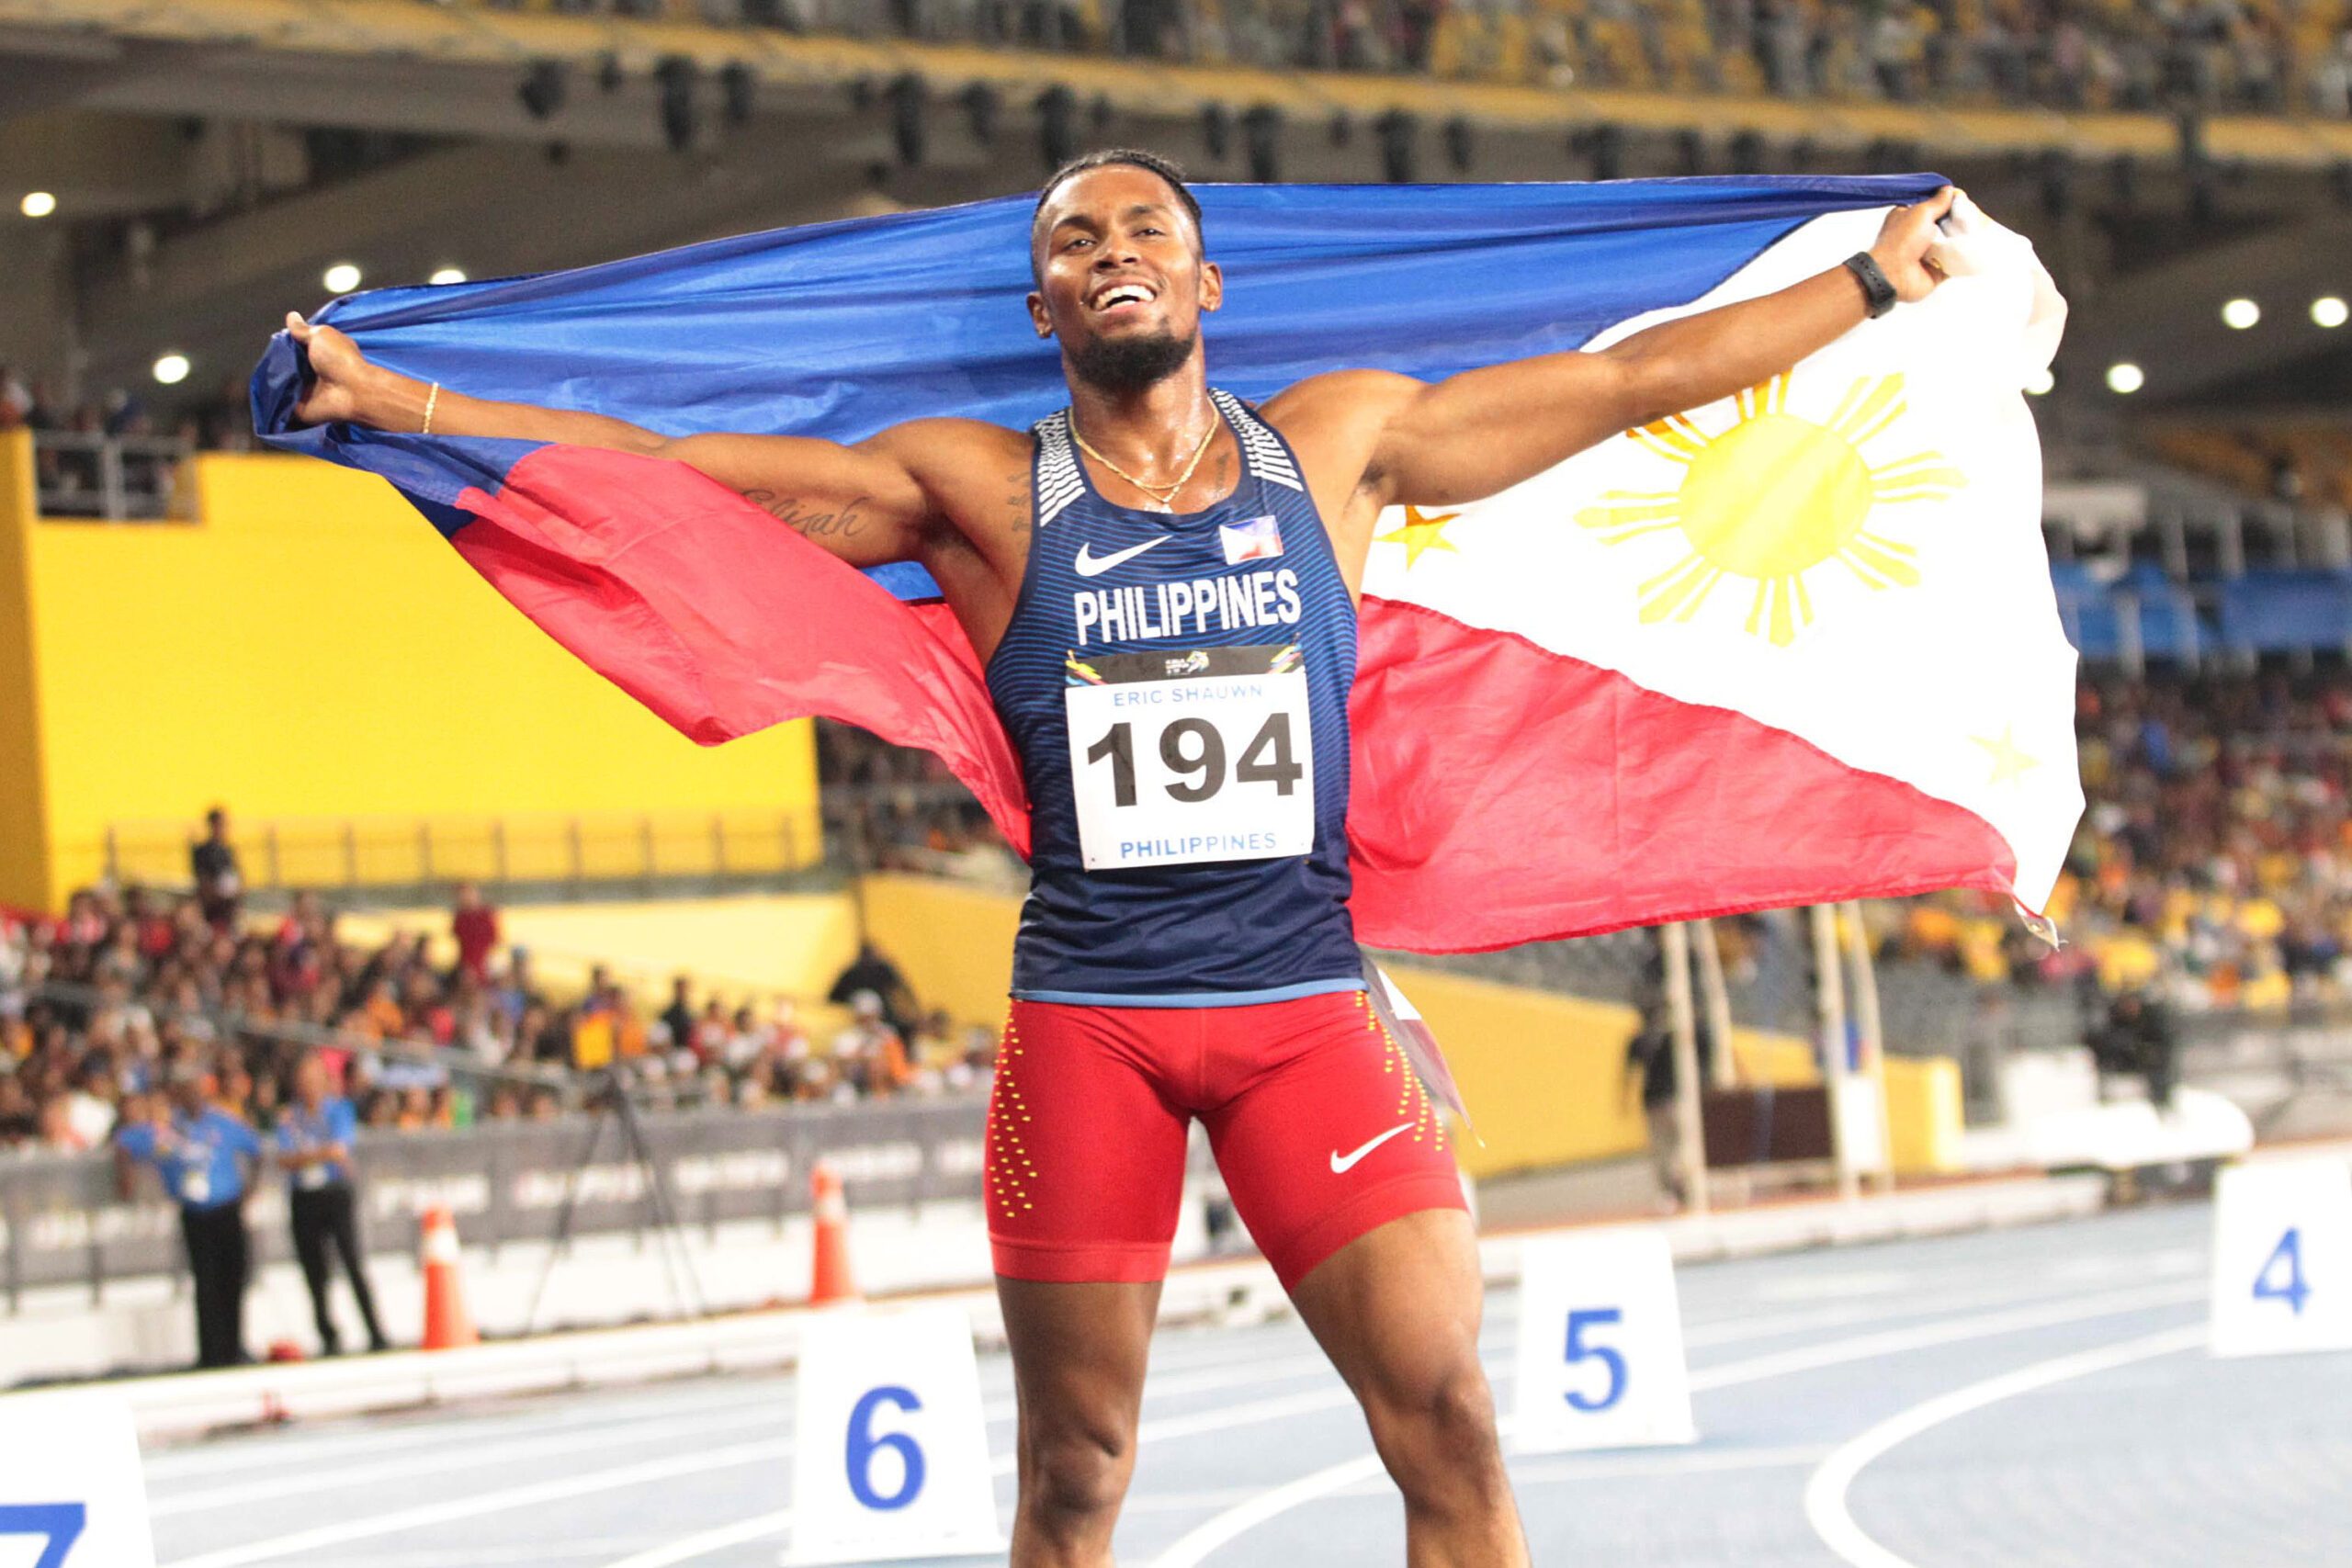 Eric Cray repeats as 400m hurdles king in 2017 SEA Games, gets silver in 100m